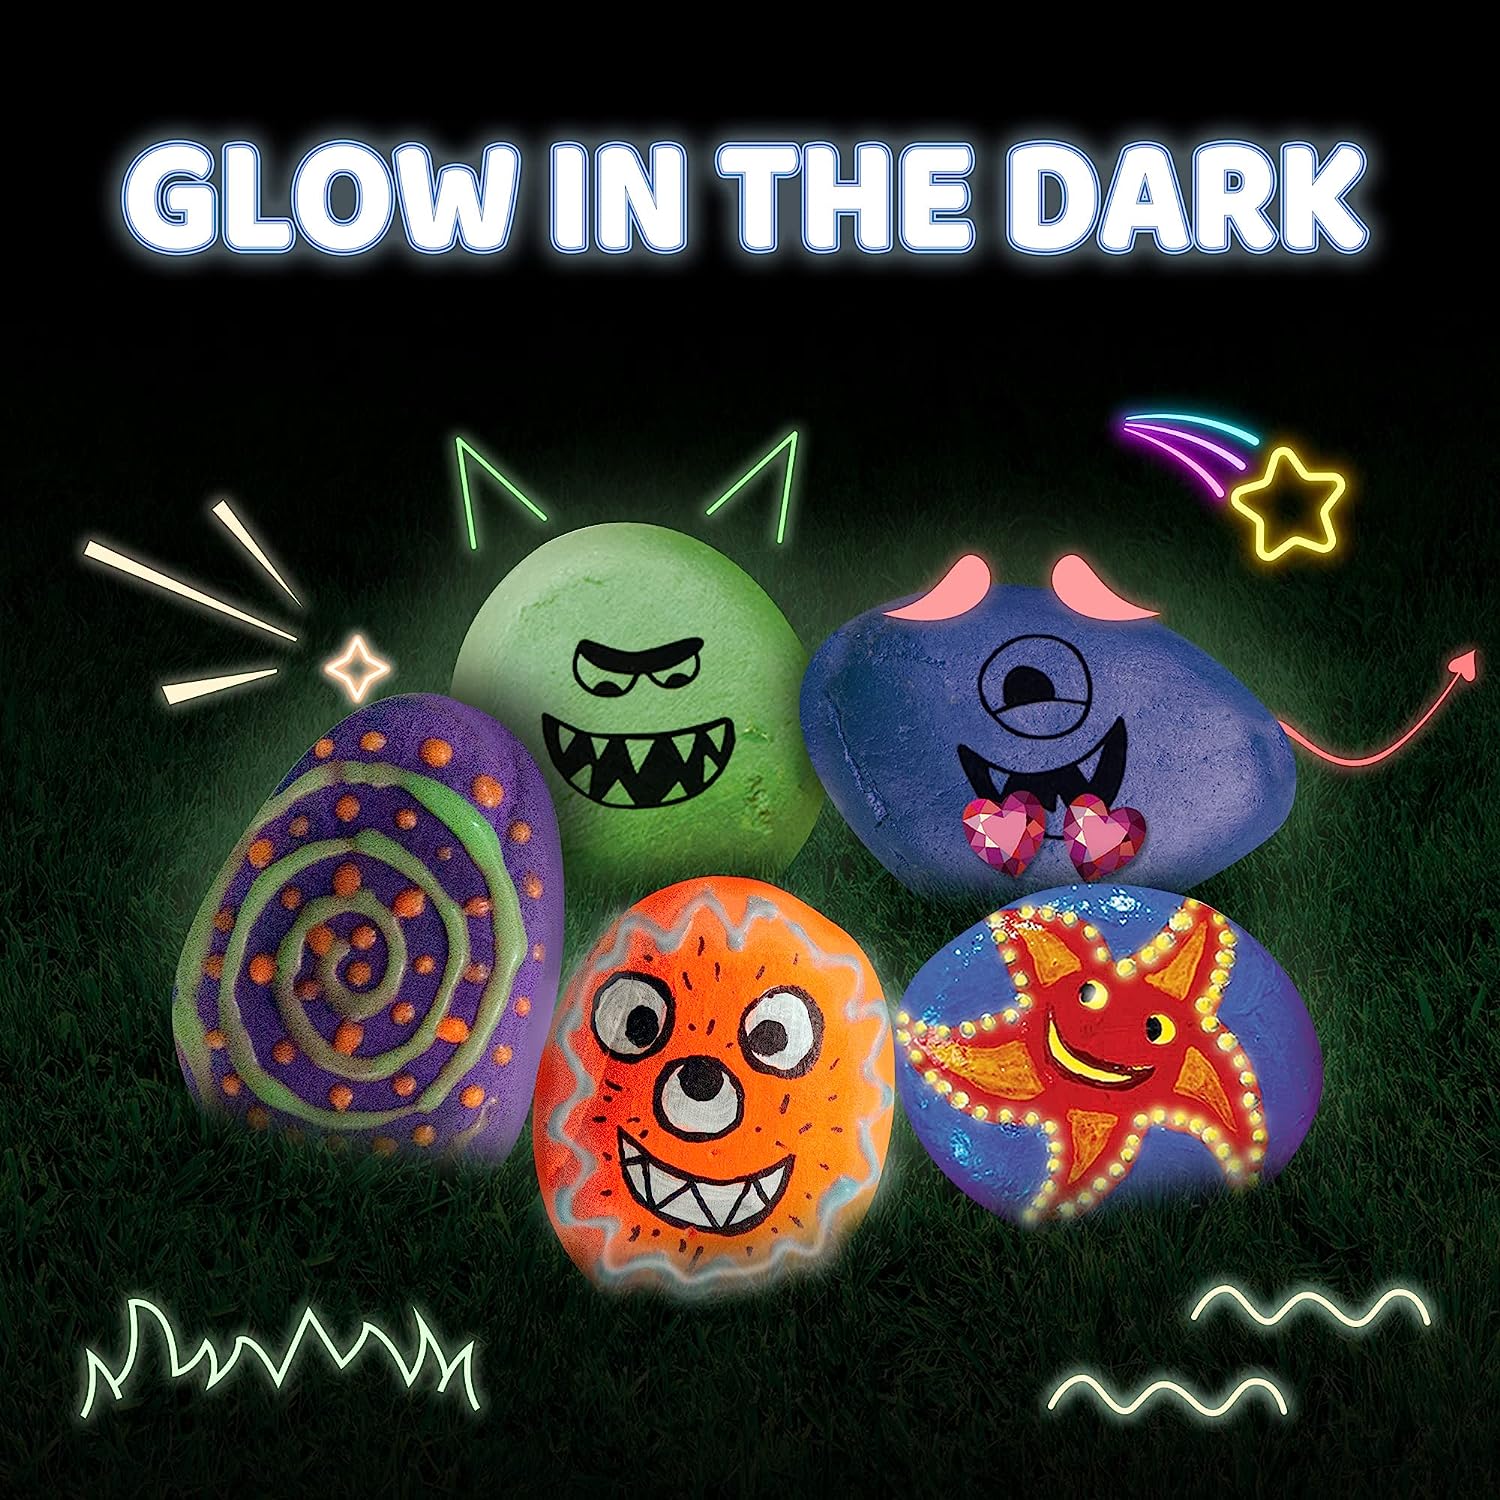 Keep kids busy without screens with this glow-in-the-dark rock